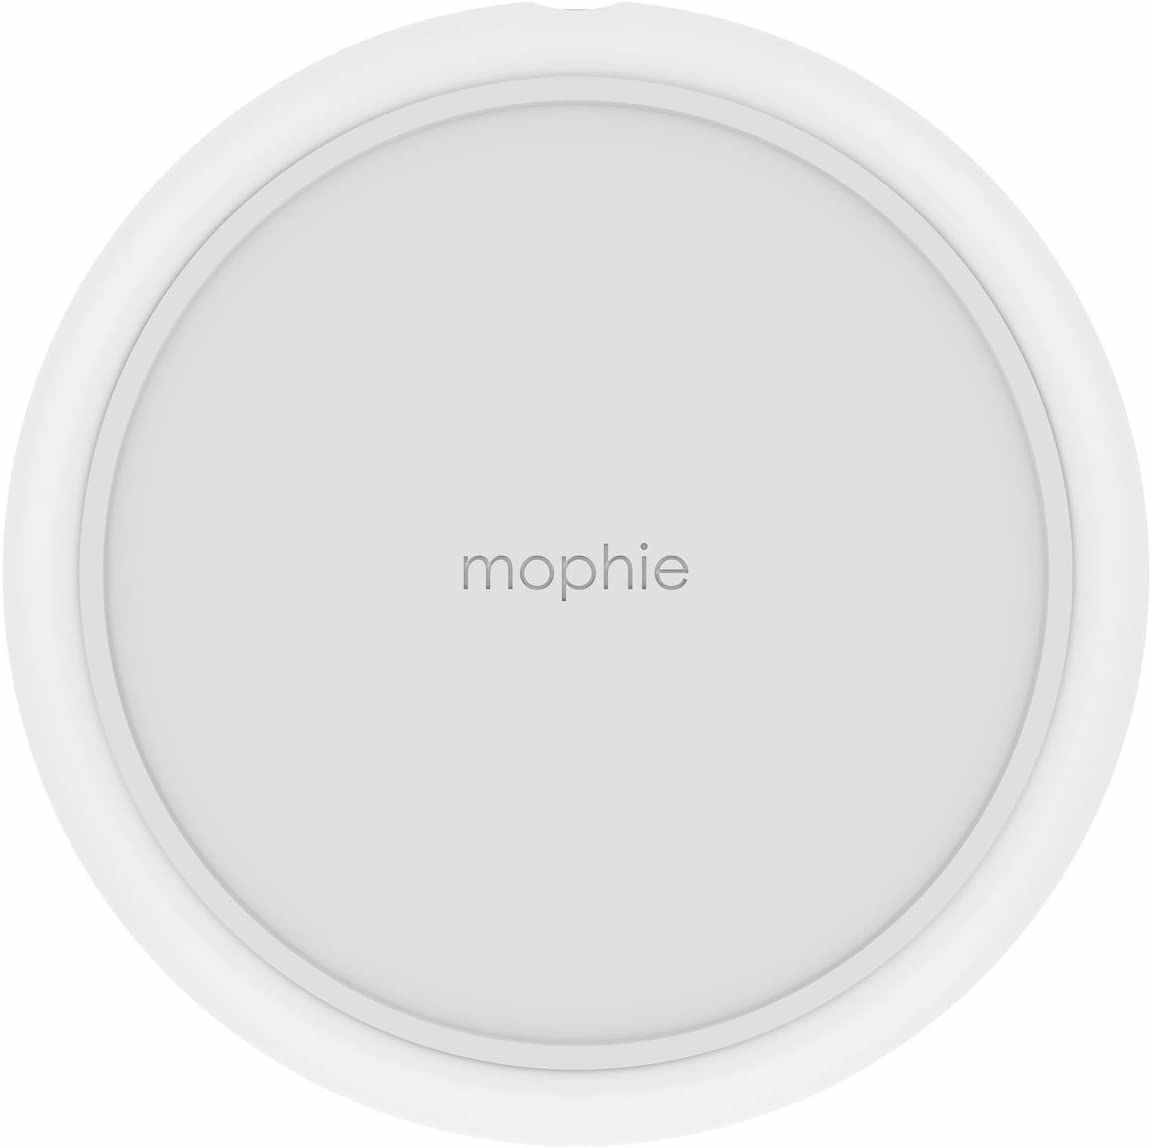 A Mophie smartphone charging pad.